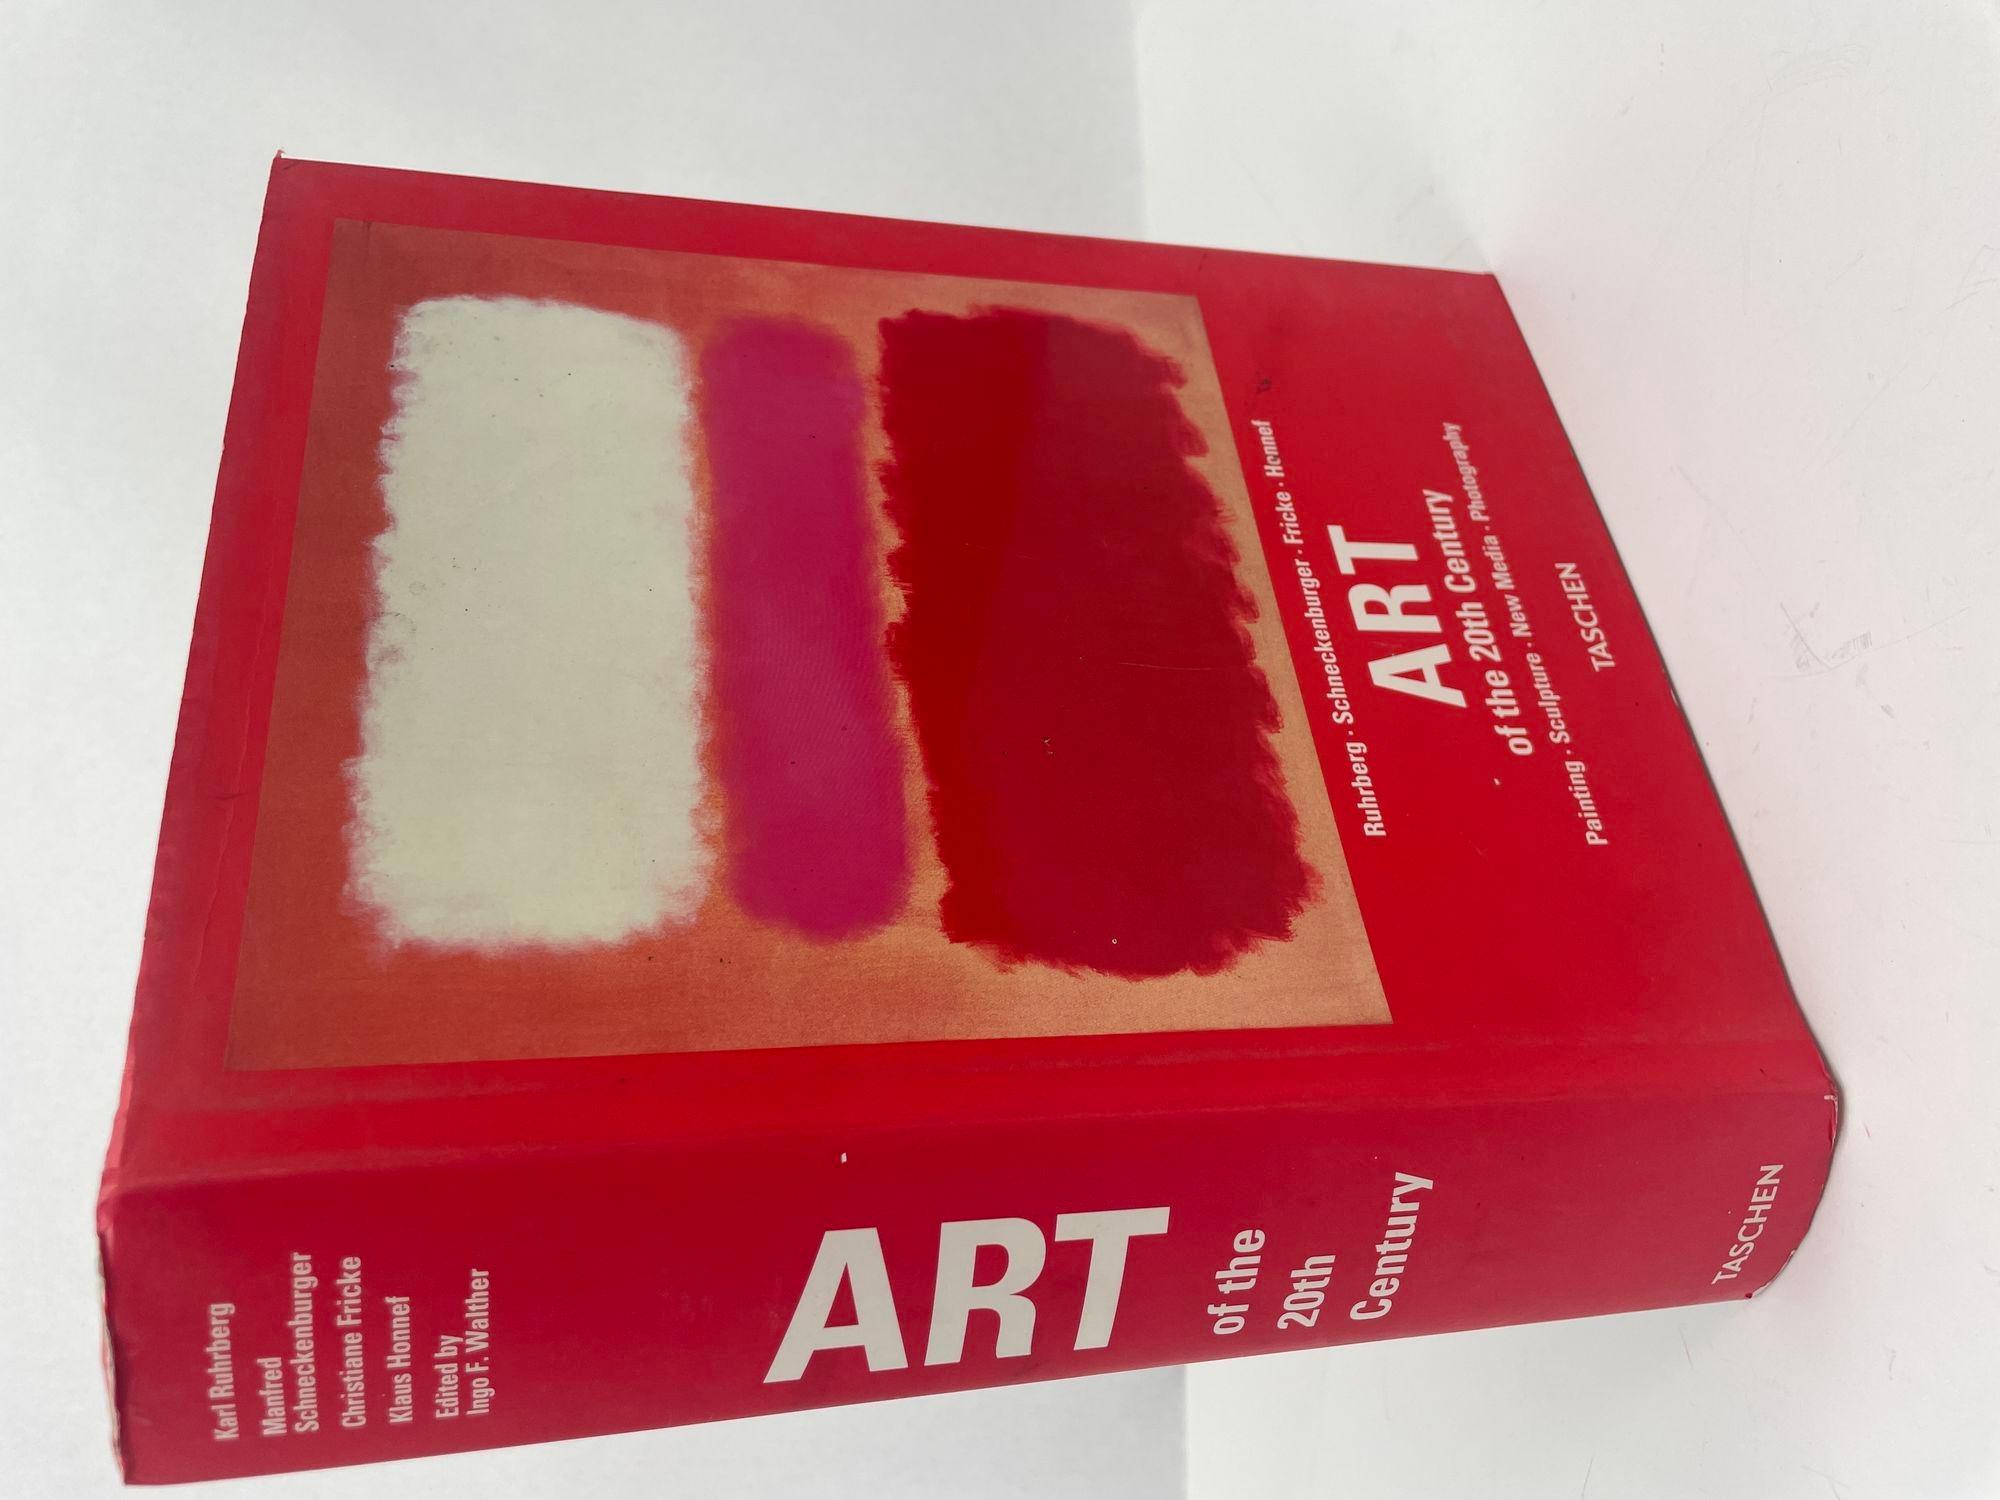 Art of the 20th Century. Published by TASCHEN, 2012.Art of the 20th Century, Vol. I, is a comprehensive guide to art of the 20th century.Hardback with dust cover. Beautiful hardcover book.Author: Ruhrberg, Schneckenburger, Fricke, Honnef.Edited by: